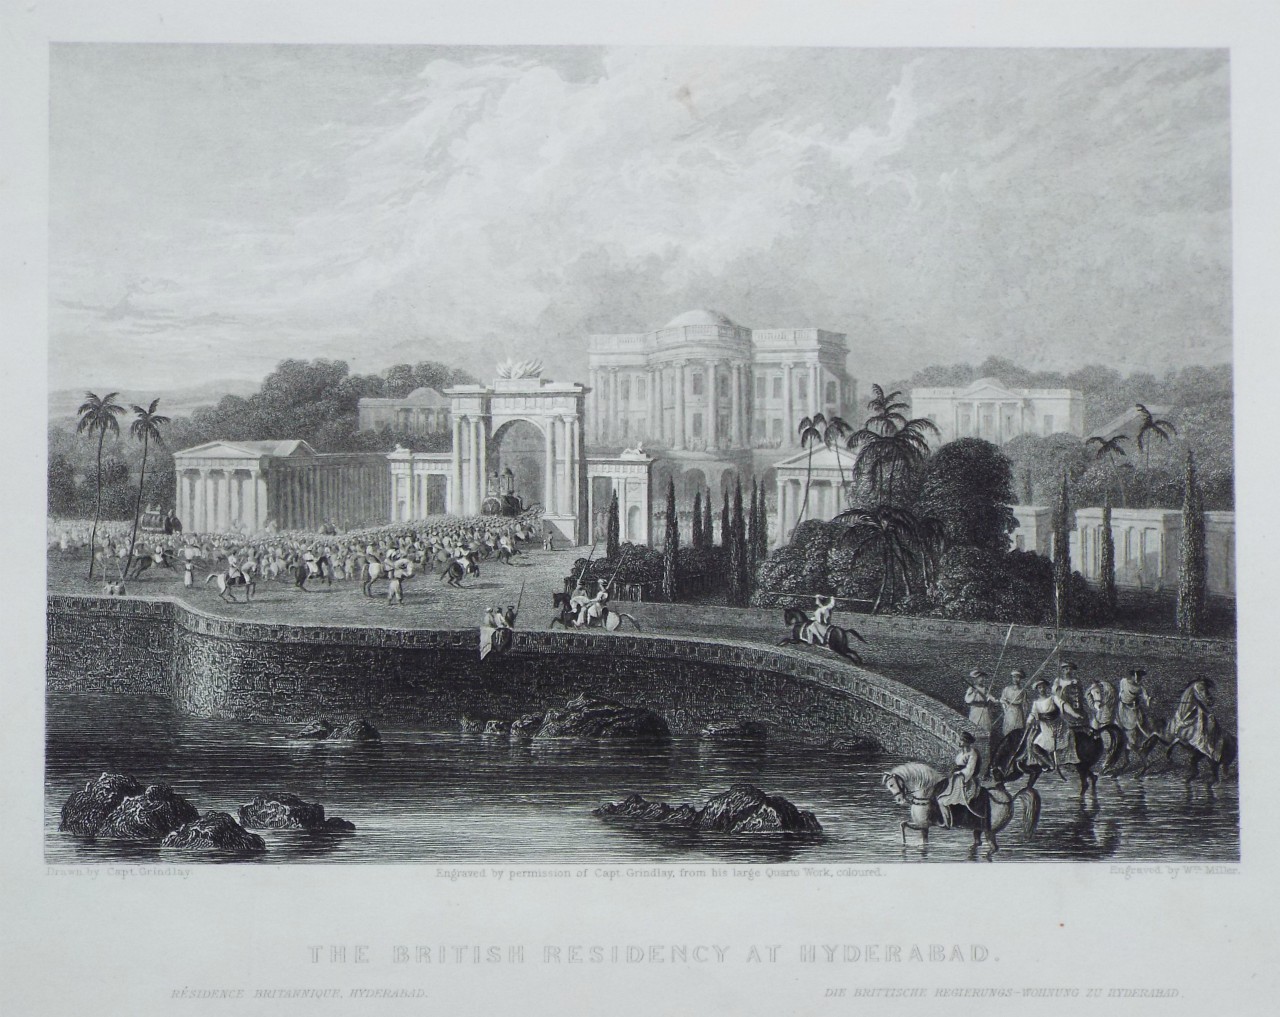 Print - The British Residence at Hyderabad. - Miller